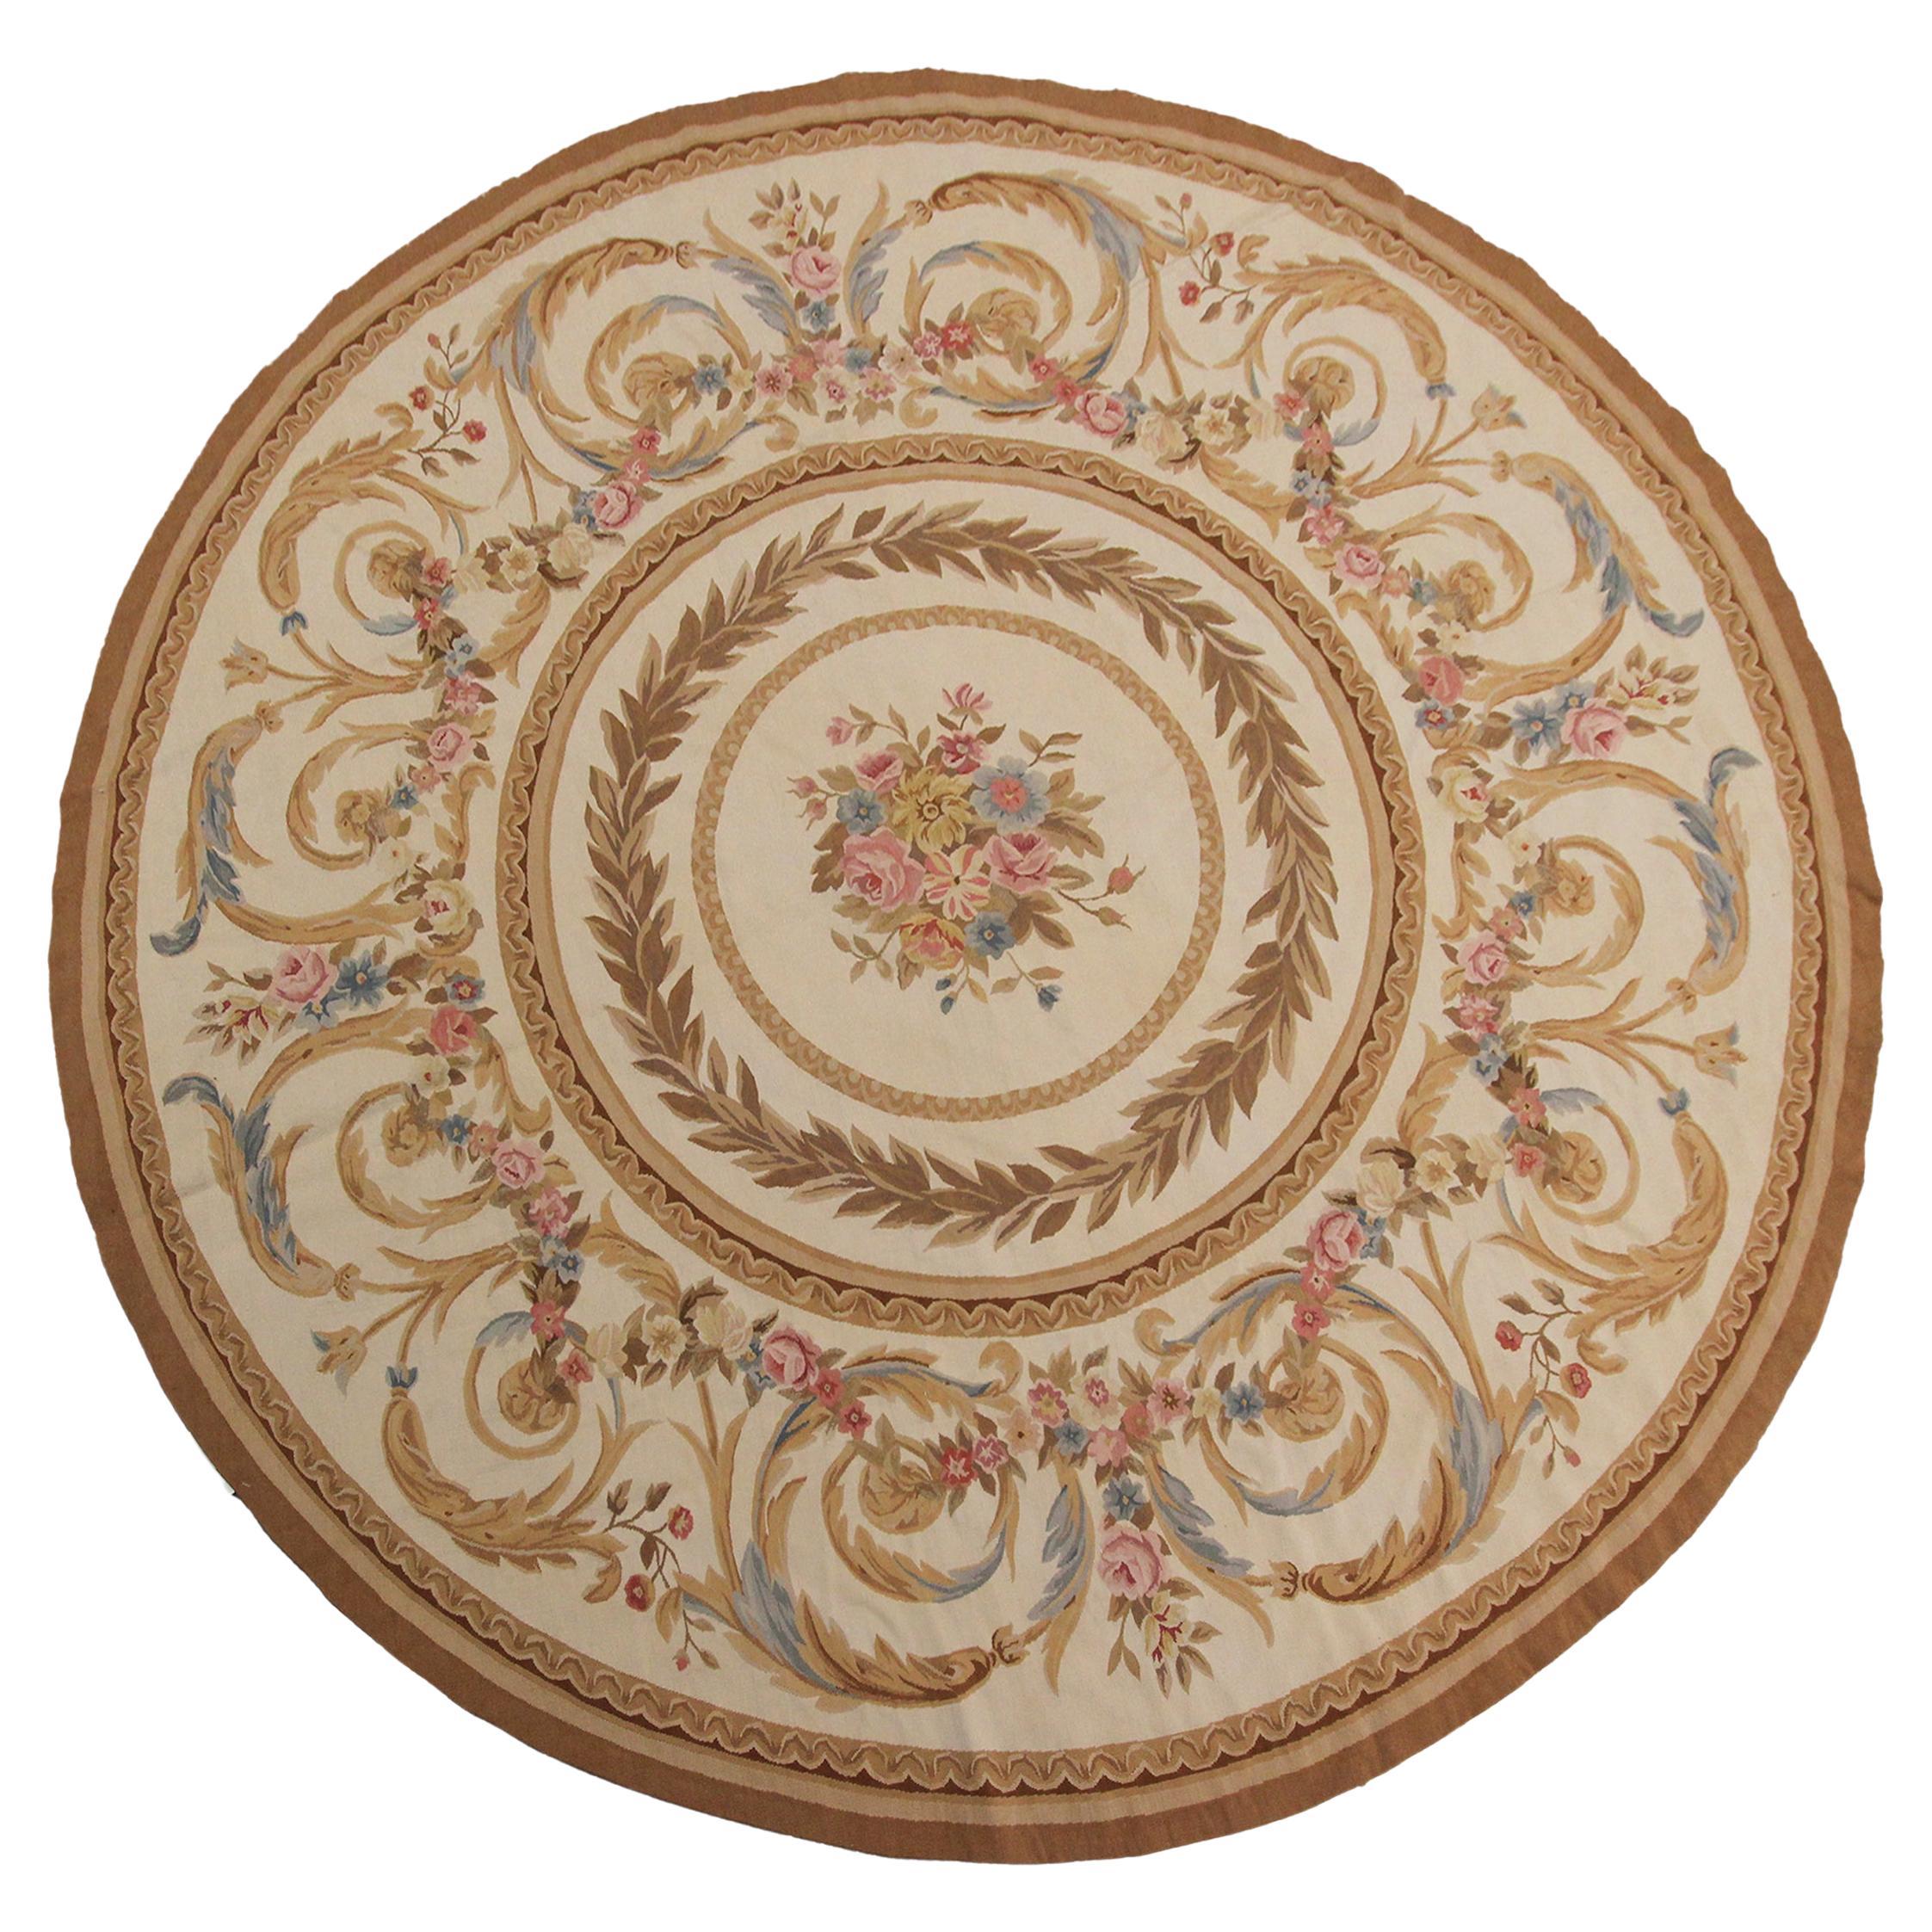 Antique French Aubusson Rug Hand Woven Aubusson Rug 8x8 Round Rug 244cm x 244cm For Sale